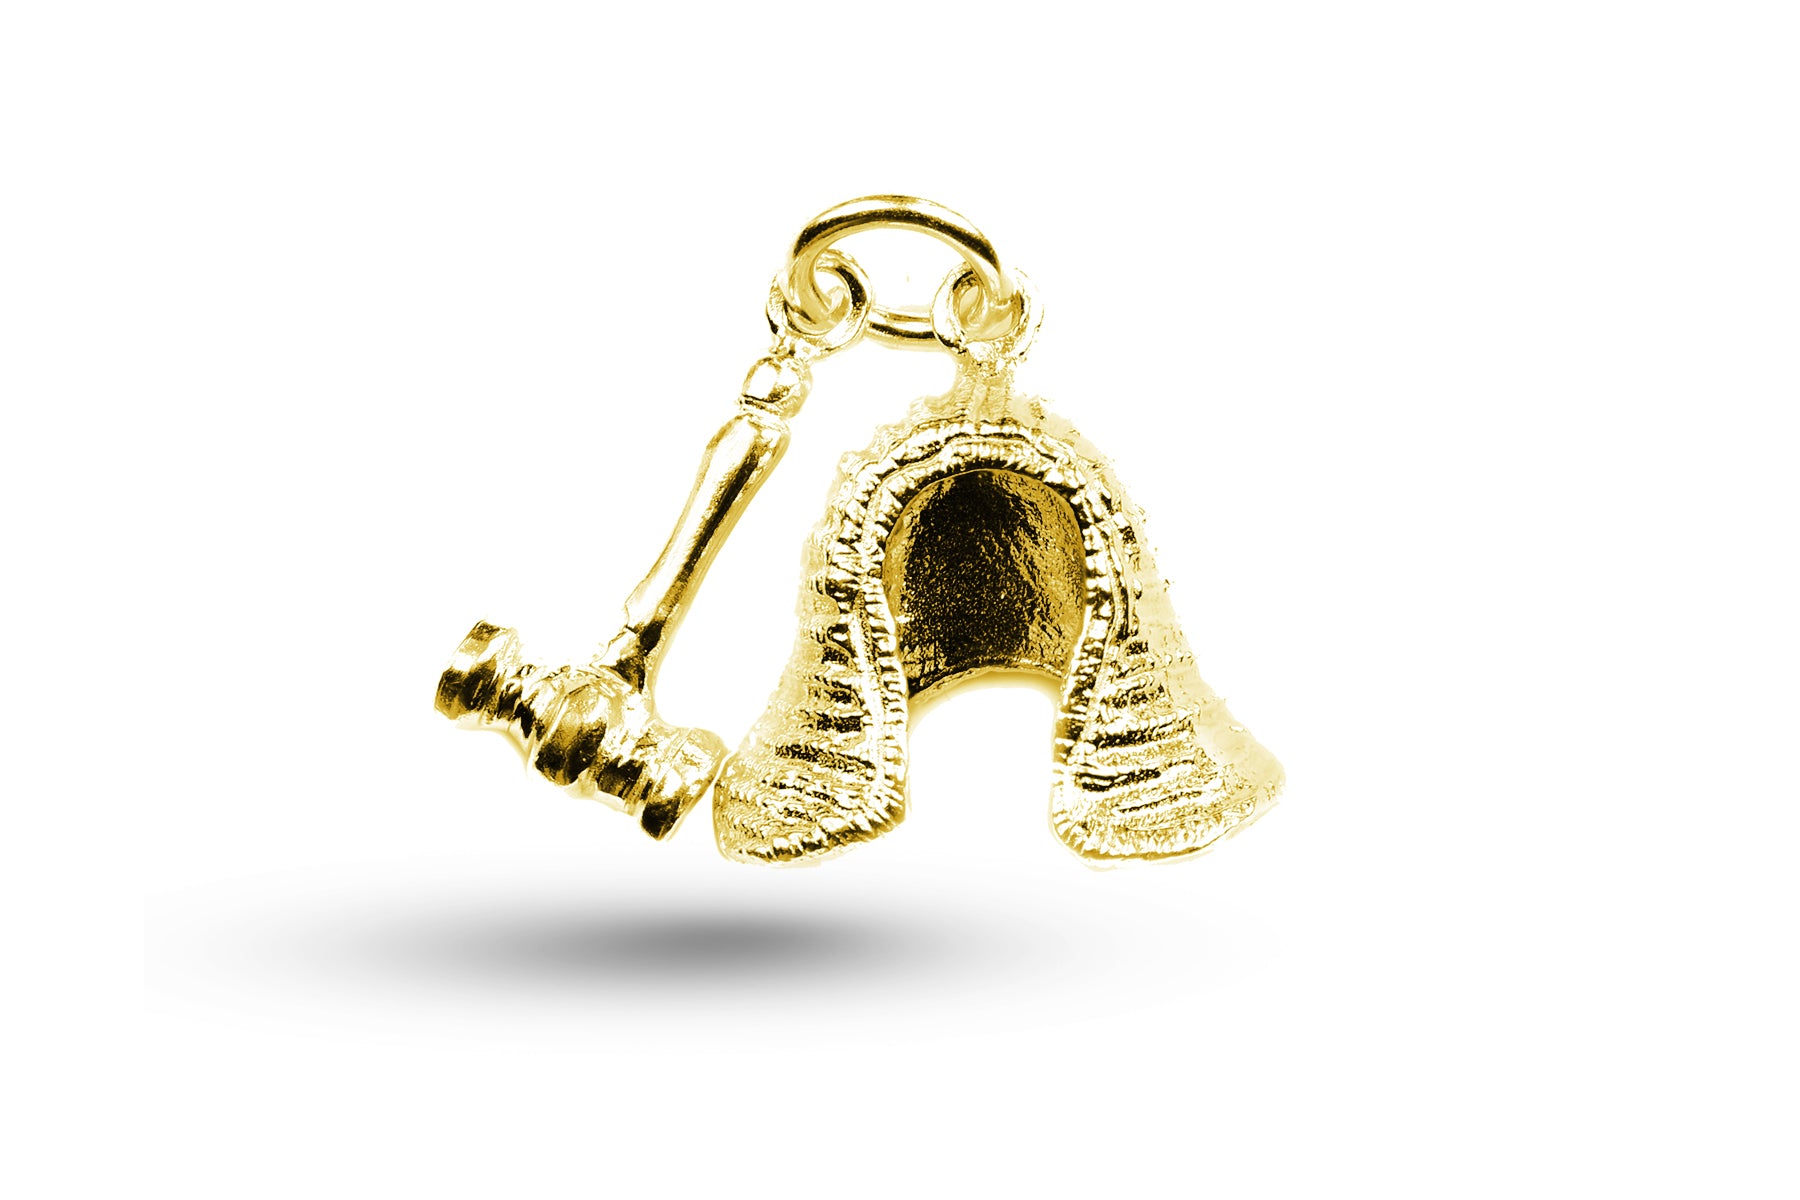 Yellow gold Judges Wig and Gavel charm.